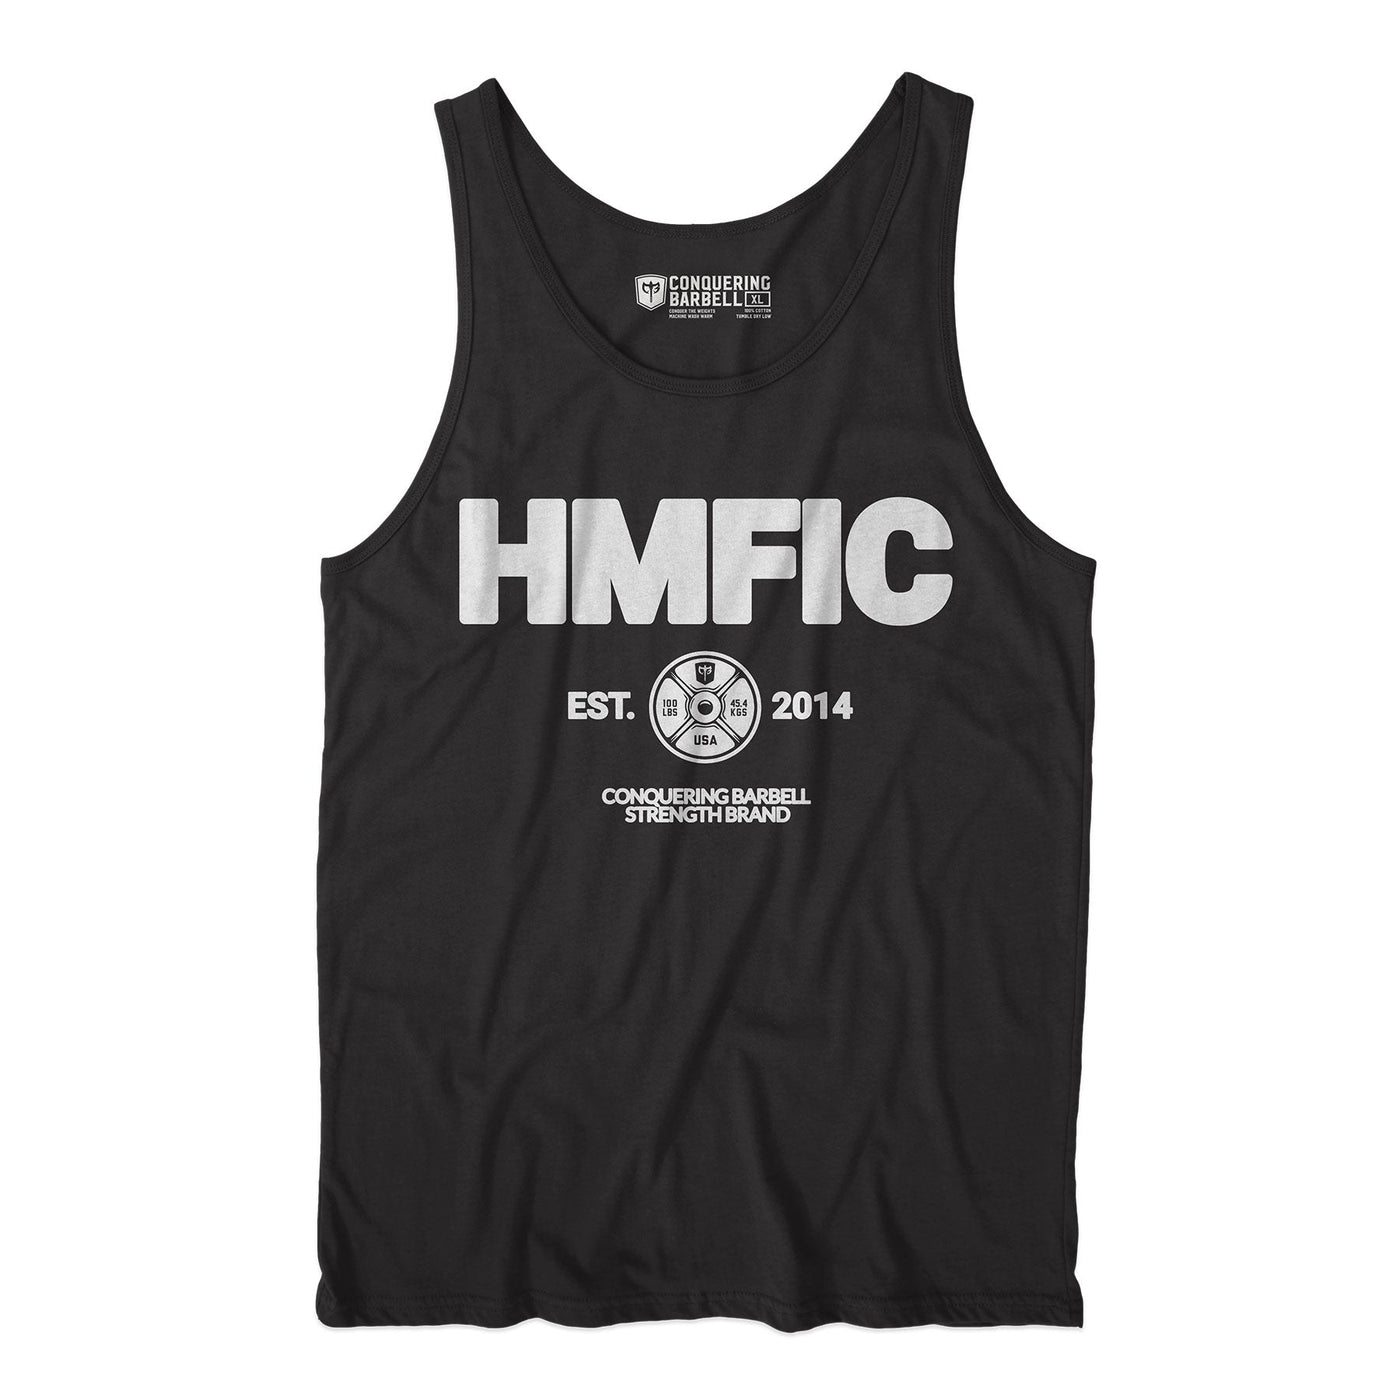 HMFIC - on Black tank top - Conquering Barbell